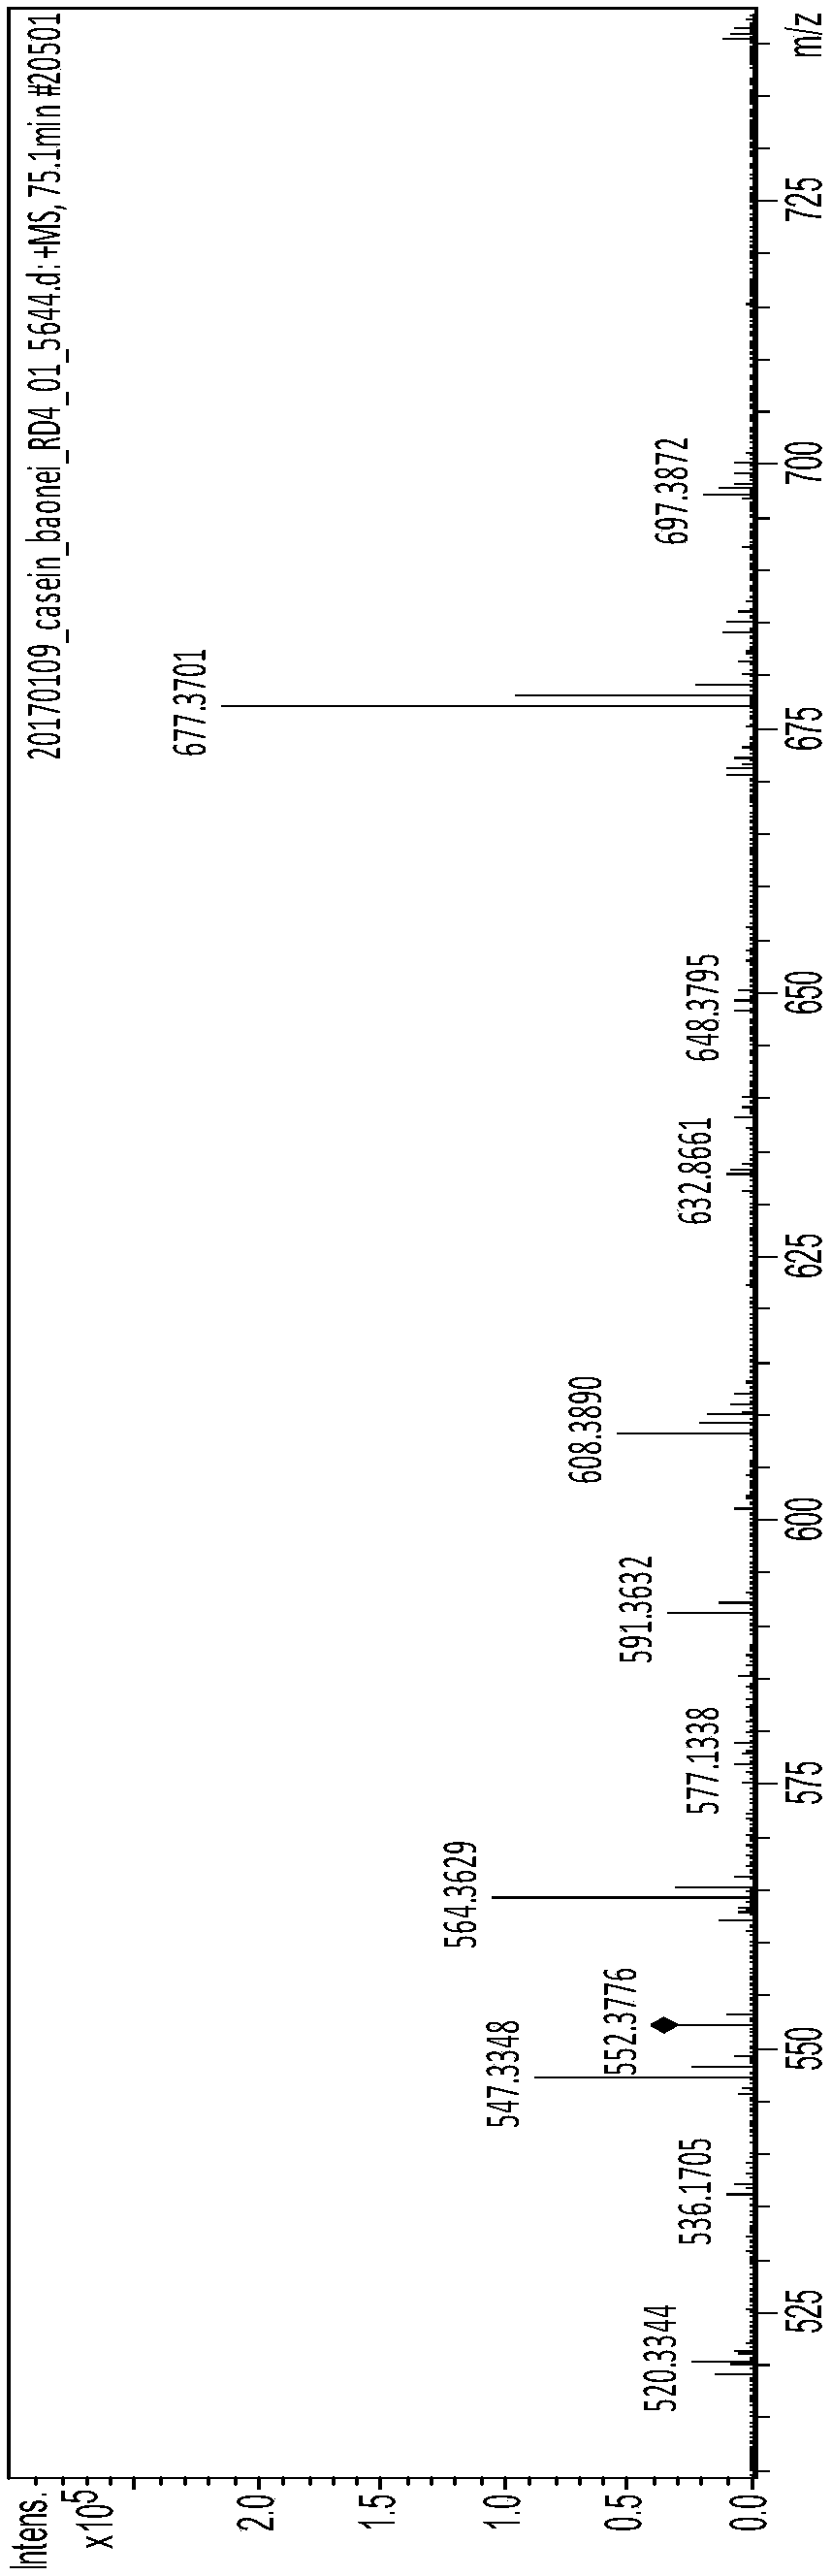 Biological active polypeptide LPPLL, preparation method and application thereof